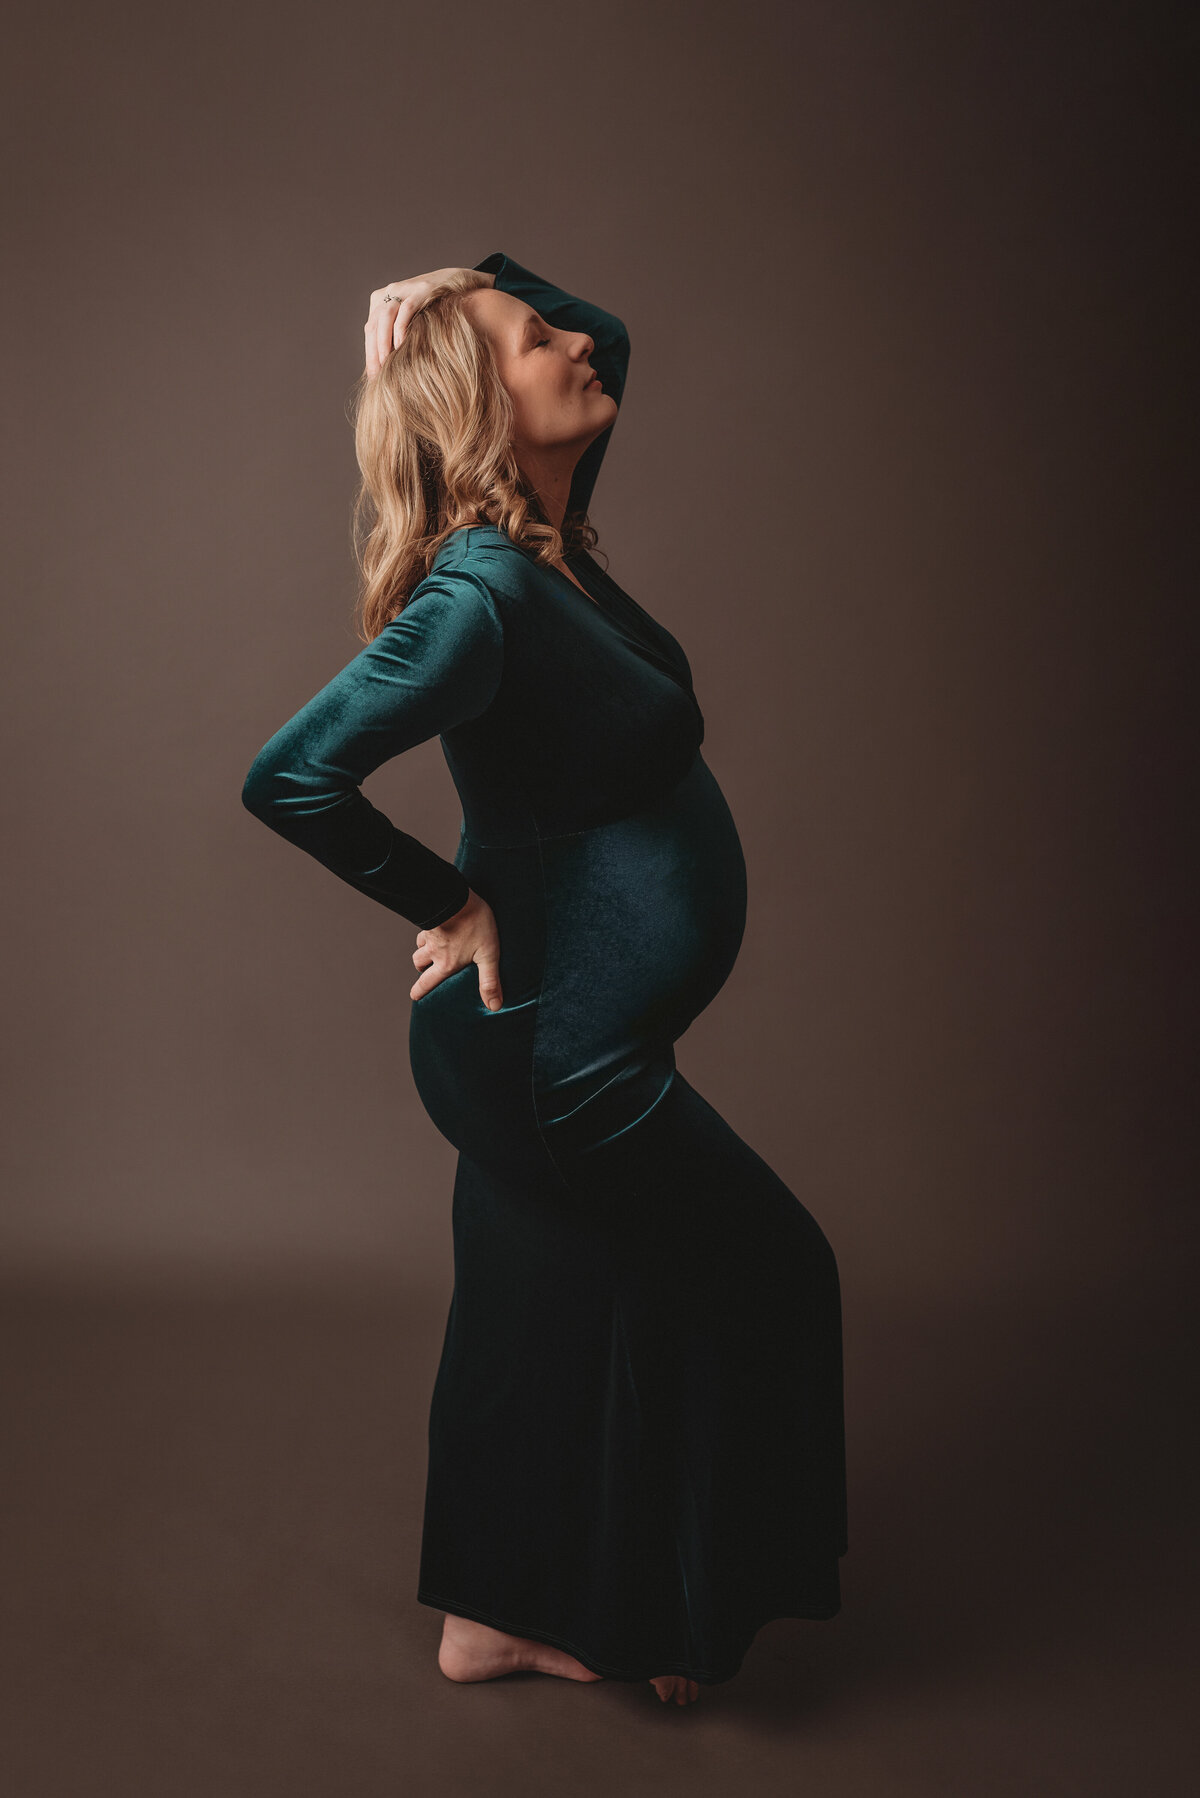 pregnancy picture of woman 37 weeks pregnant wearing green velvet dress  posing with hand on back and one leg popped up on dark gray backdrop